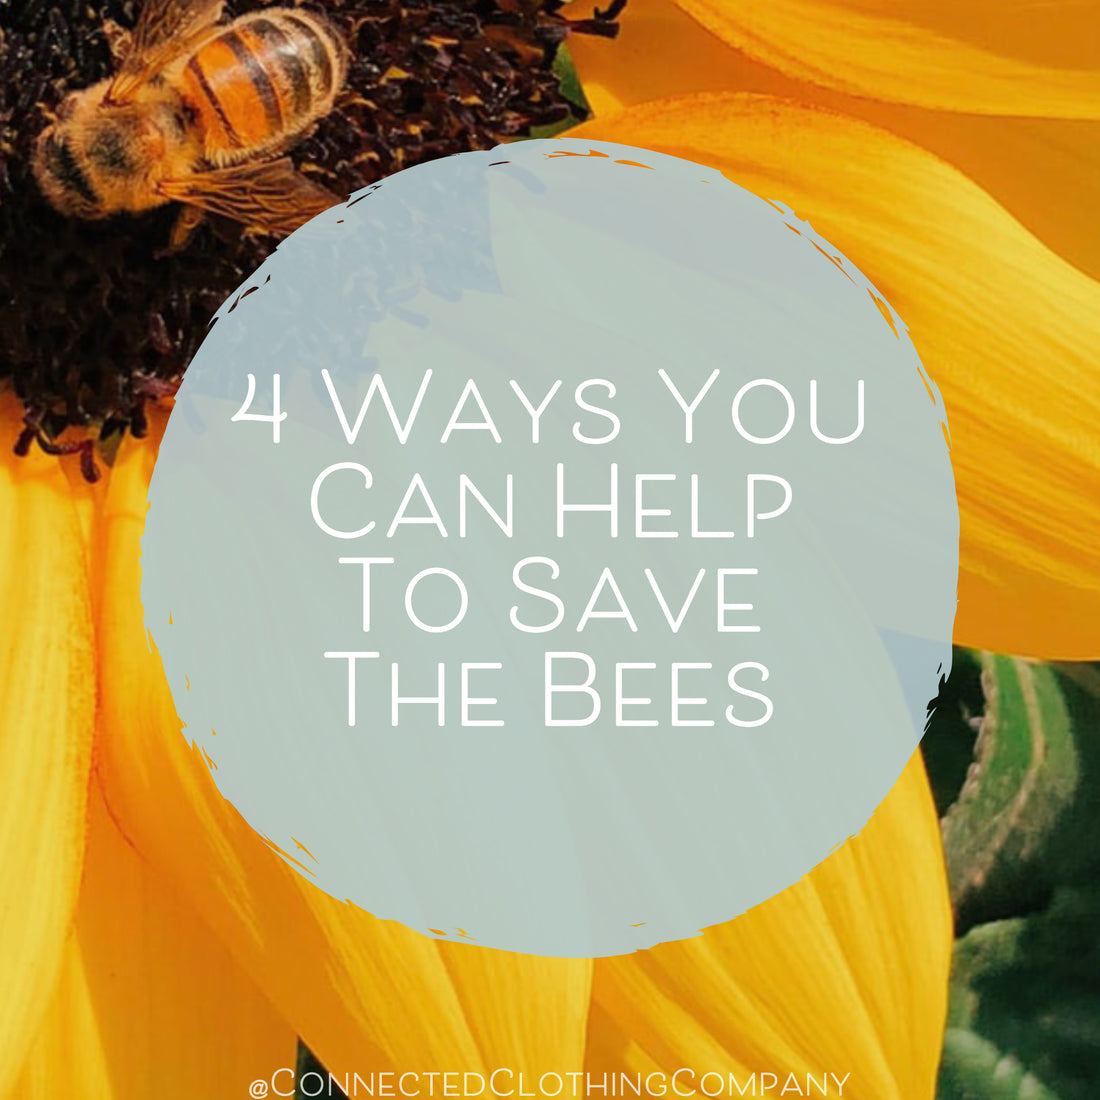 4 Ways You Can Help To Save The Bees